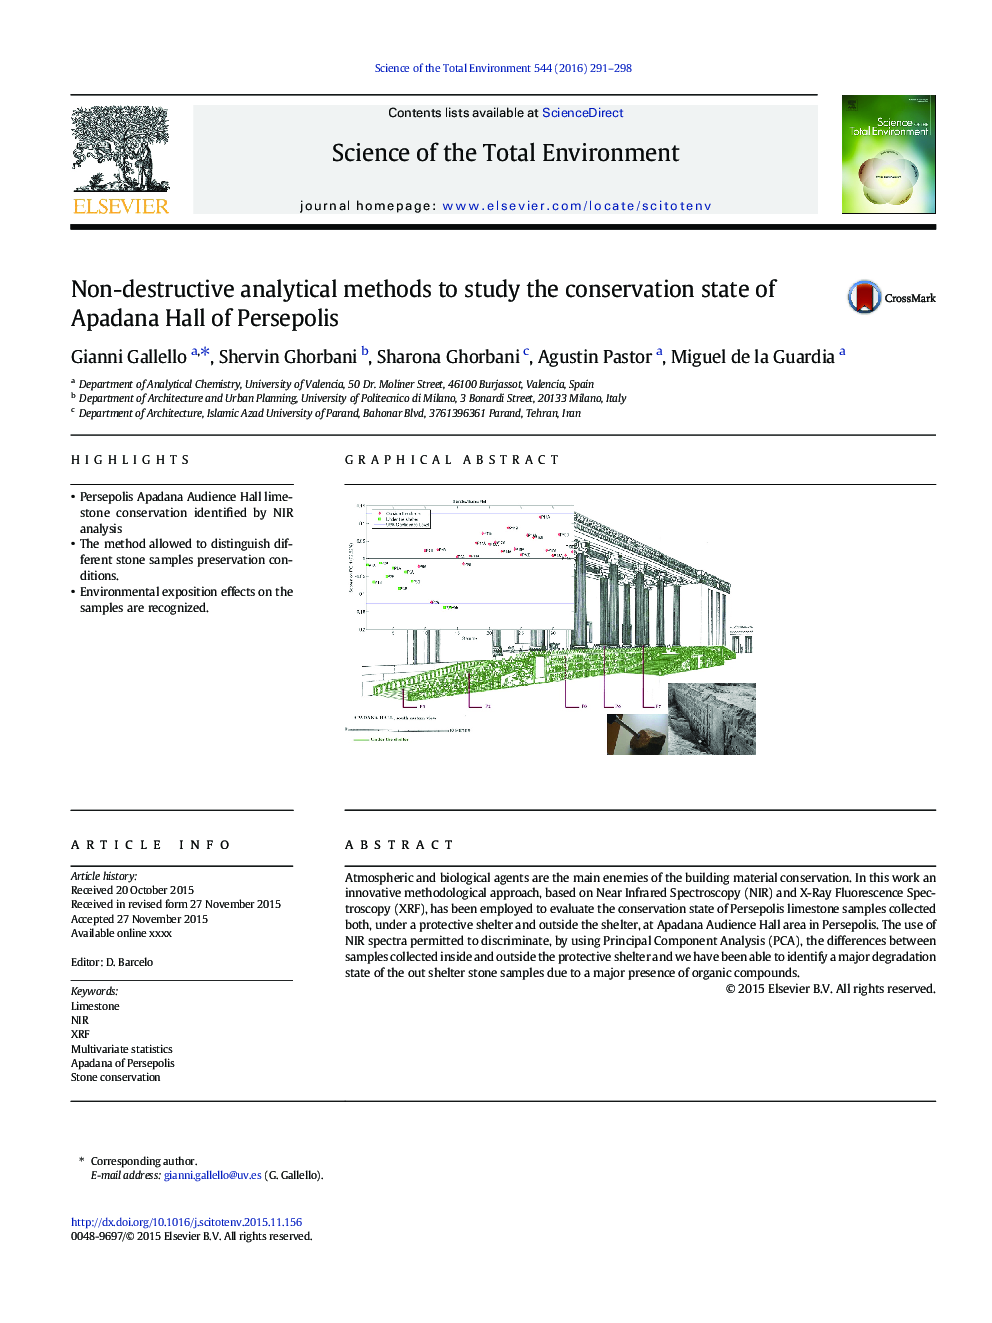 Non-destructive analytical methods to study the conservation state of Apadana Hall of Persepolis